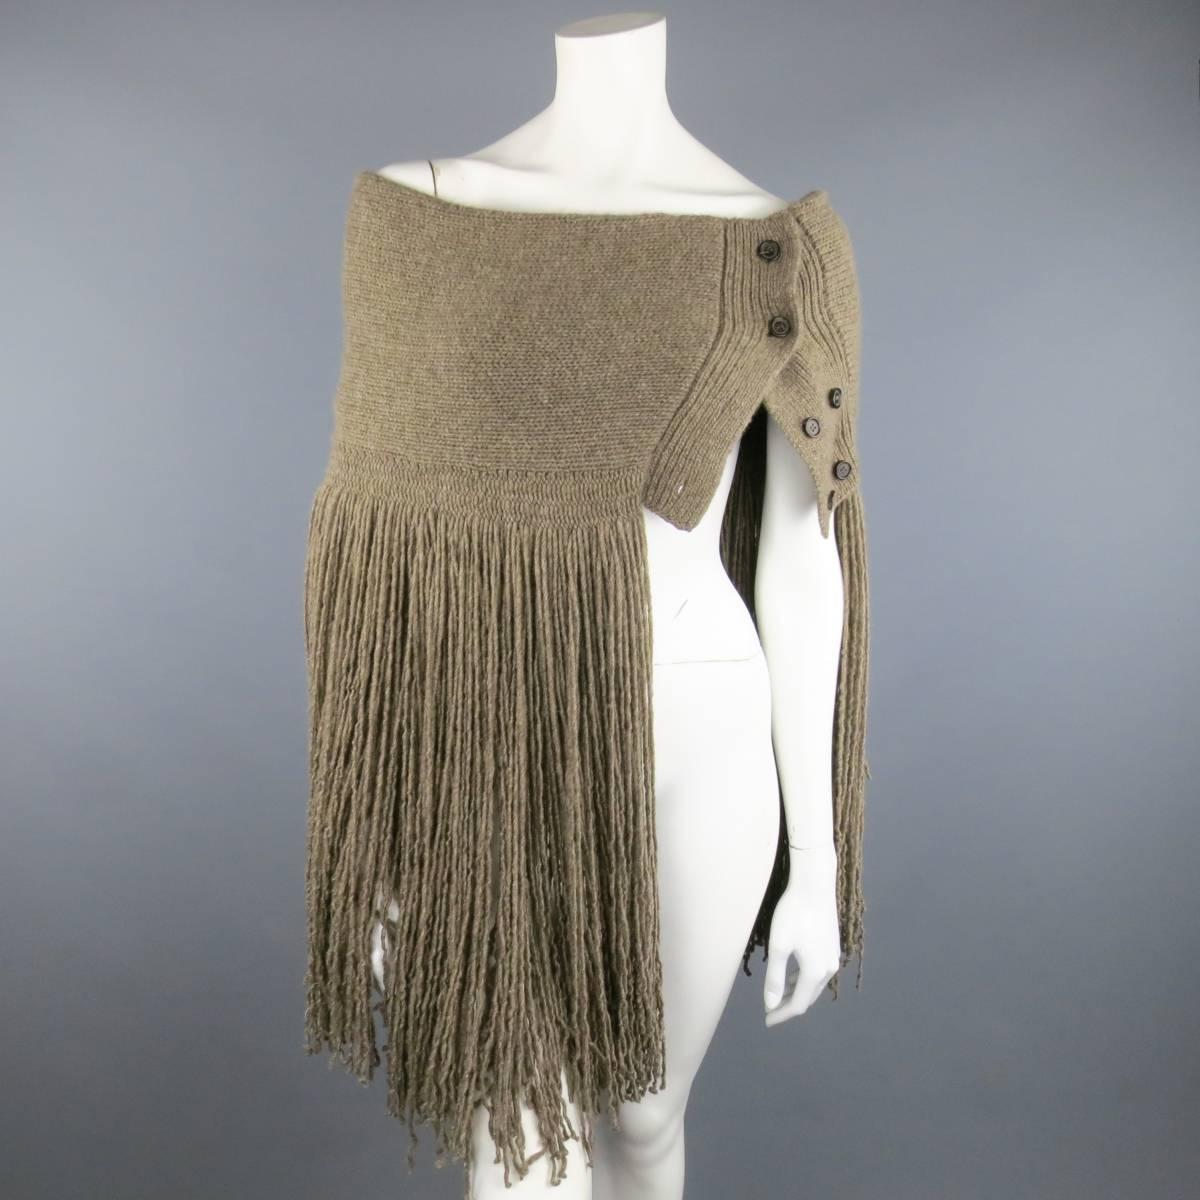 RALPH LAUREN COLLECTION variegated taupe cashmere scarf includes an oversized shawl collar with layered fringe, button closure with option to wear snug or off-shoulder. Featured in F/W 2015. Tags removed. As-Is. Retails at $1590.00.
 
Excellent